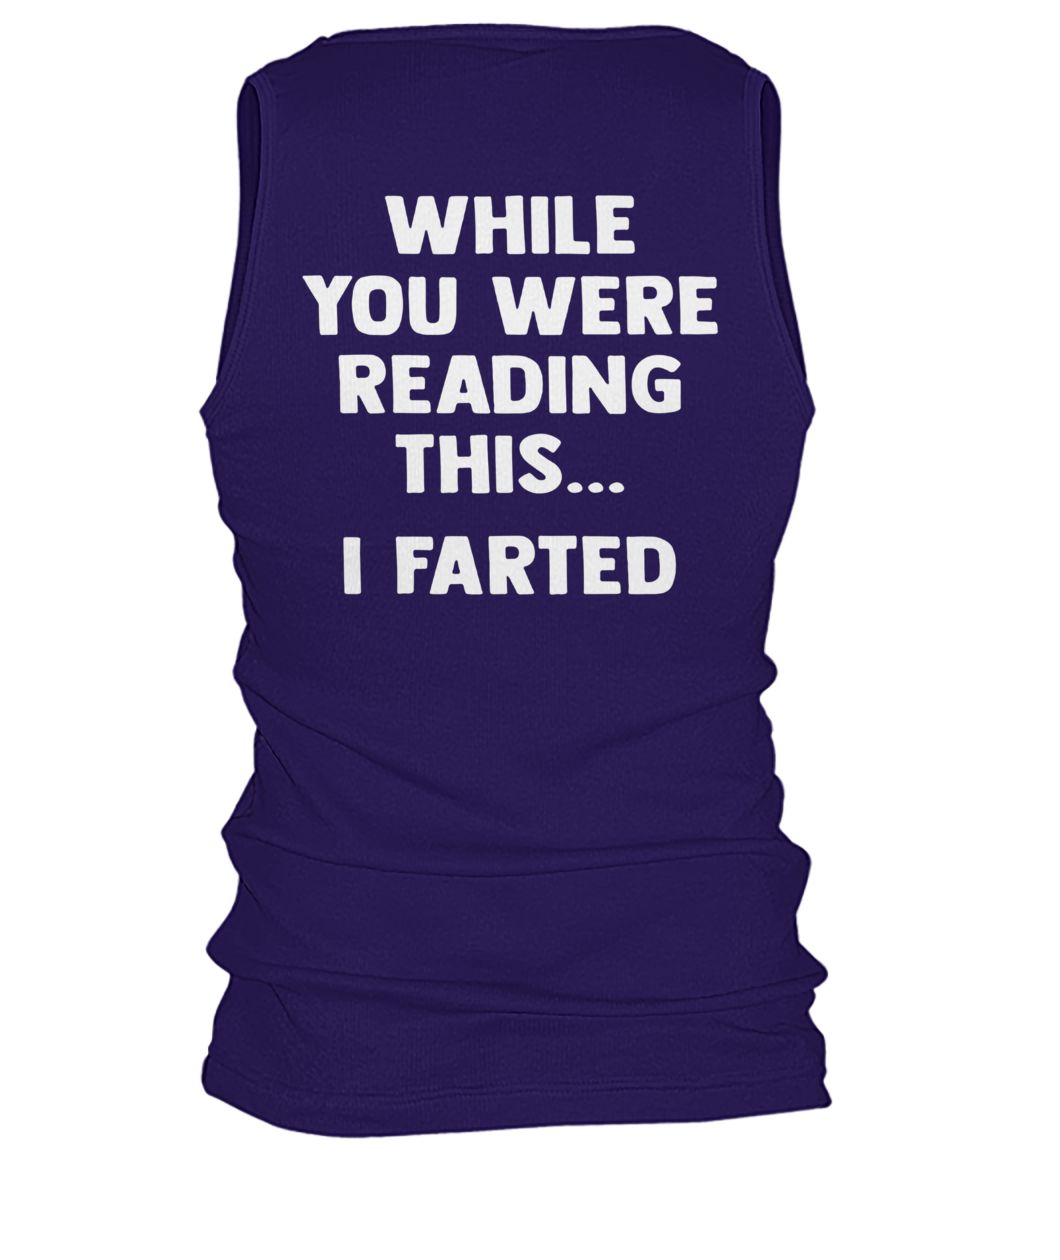 While you were reading this I farted men's tank top